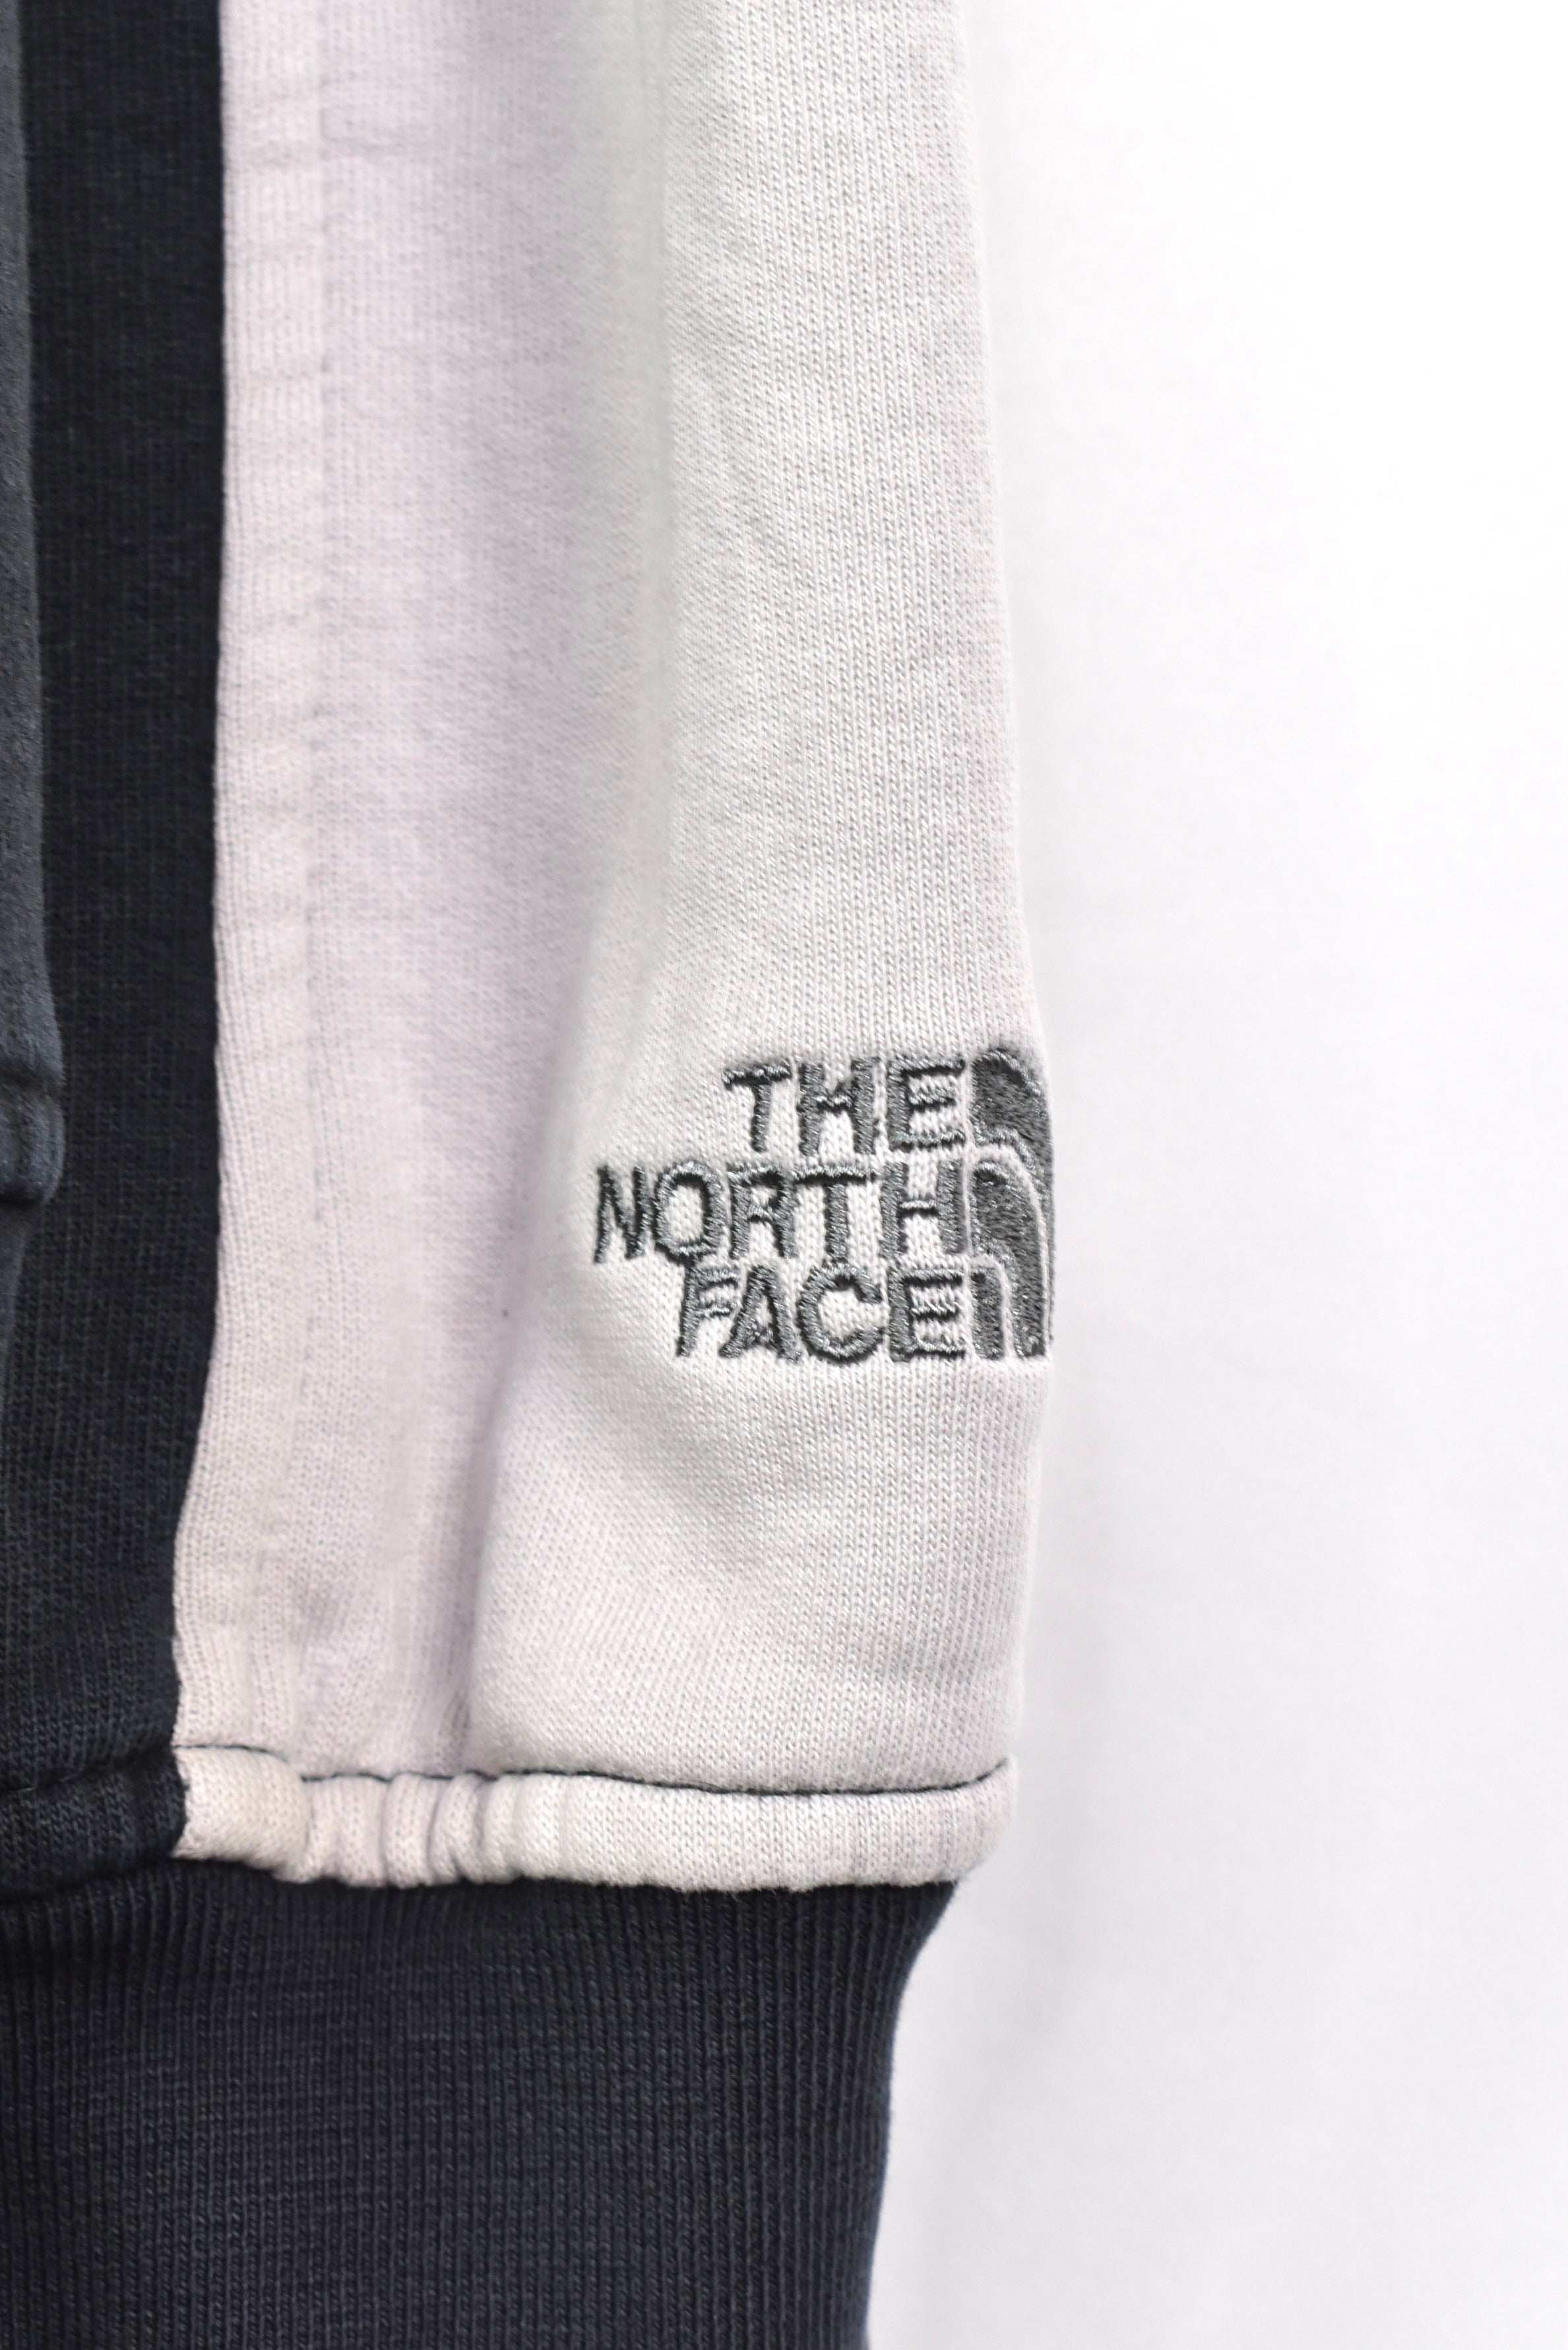 Vintage The North Face hoodie, full zip embroidered sweatshirt - XL, black THE NORTH FACE